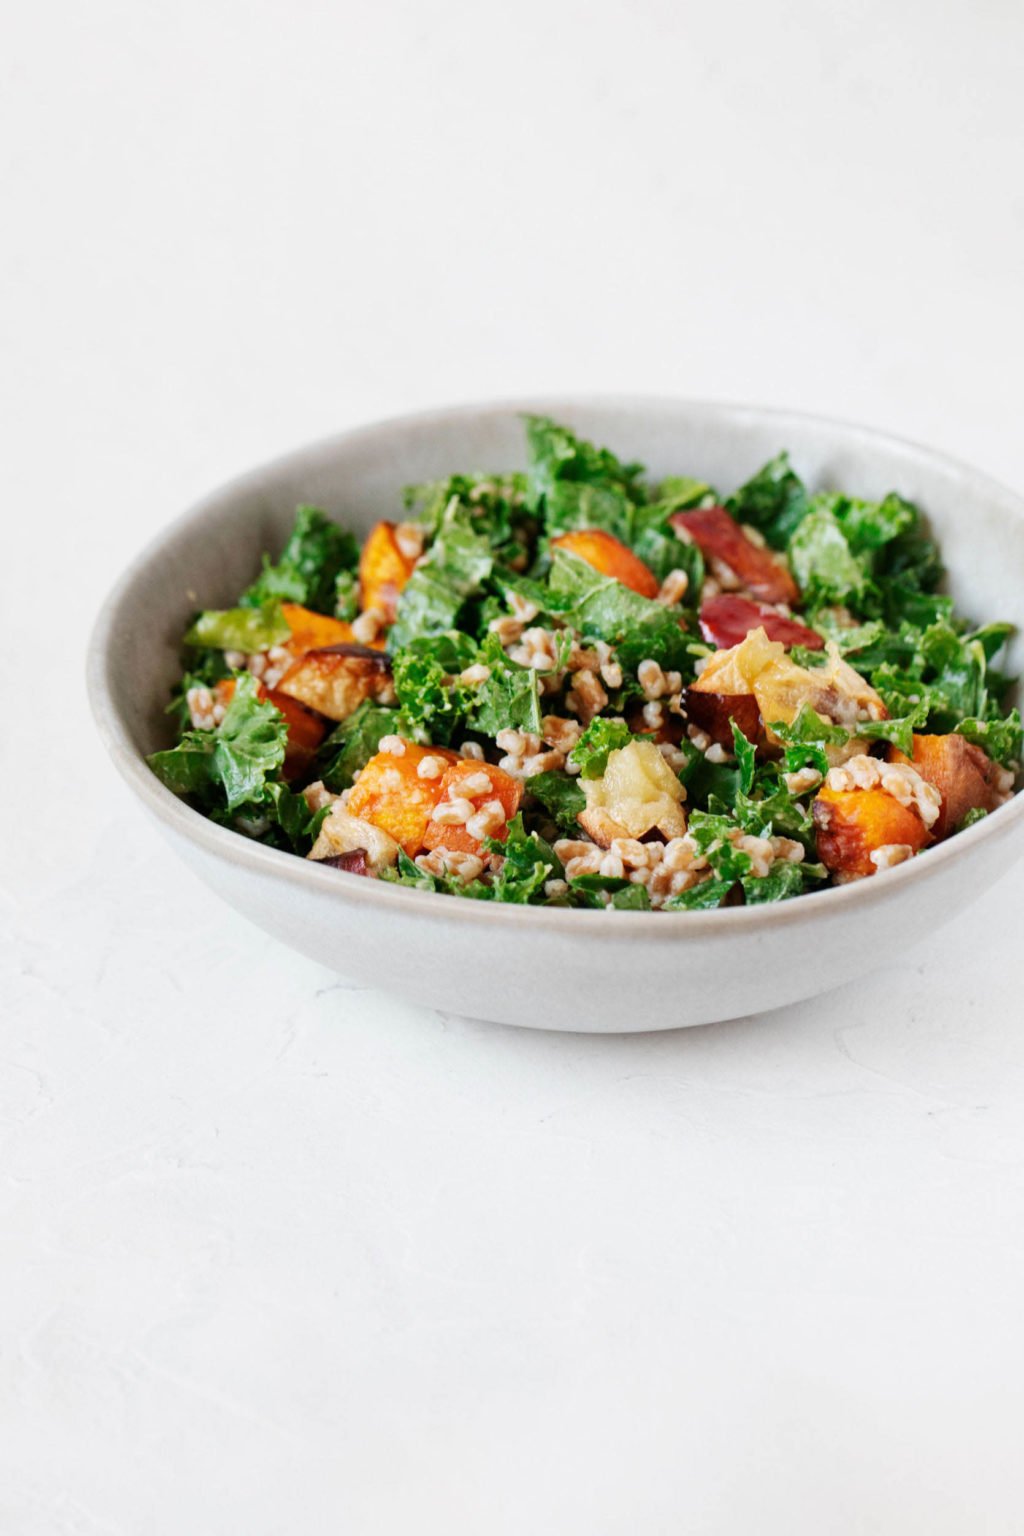 A small, white bowl is filled with a kale, sweet potato, and apple salad. The salad contains grains of farro.